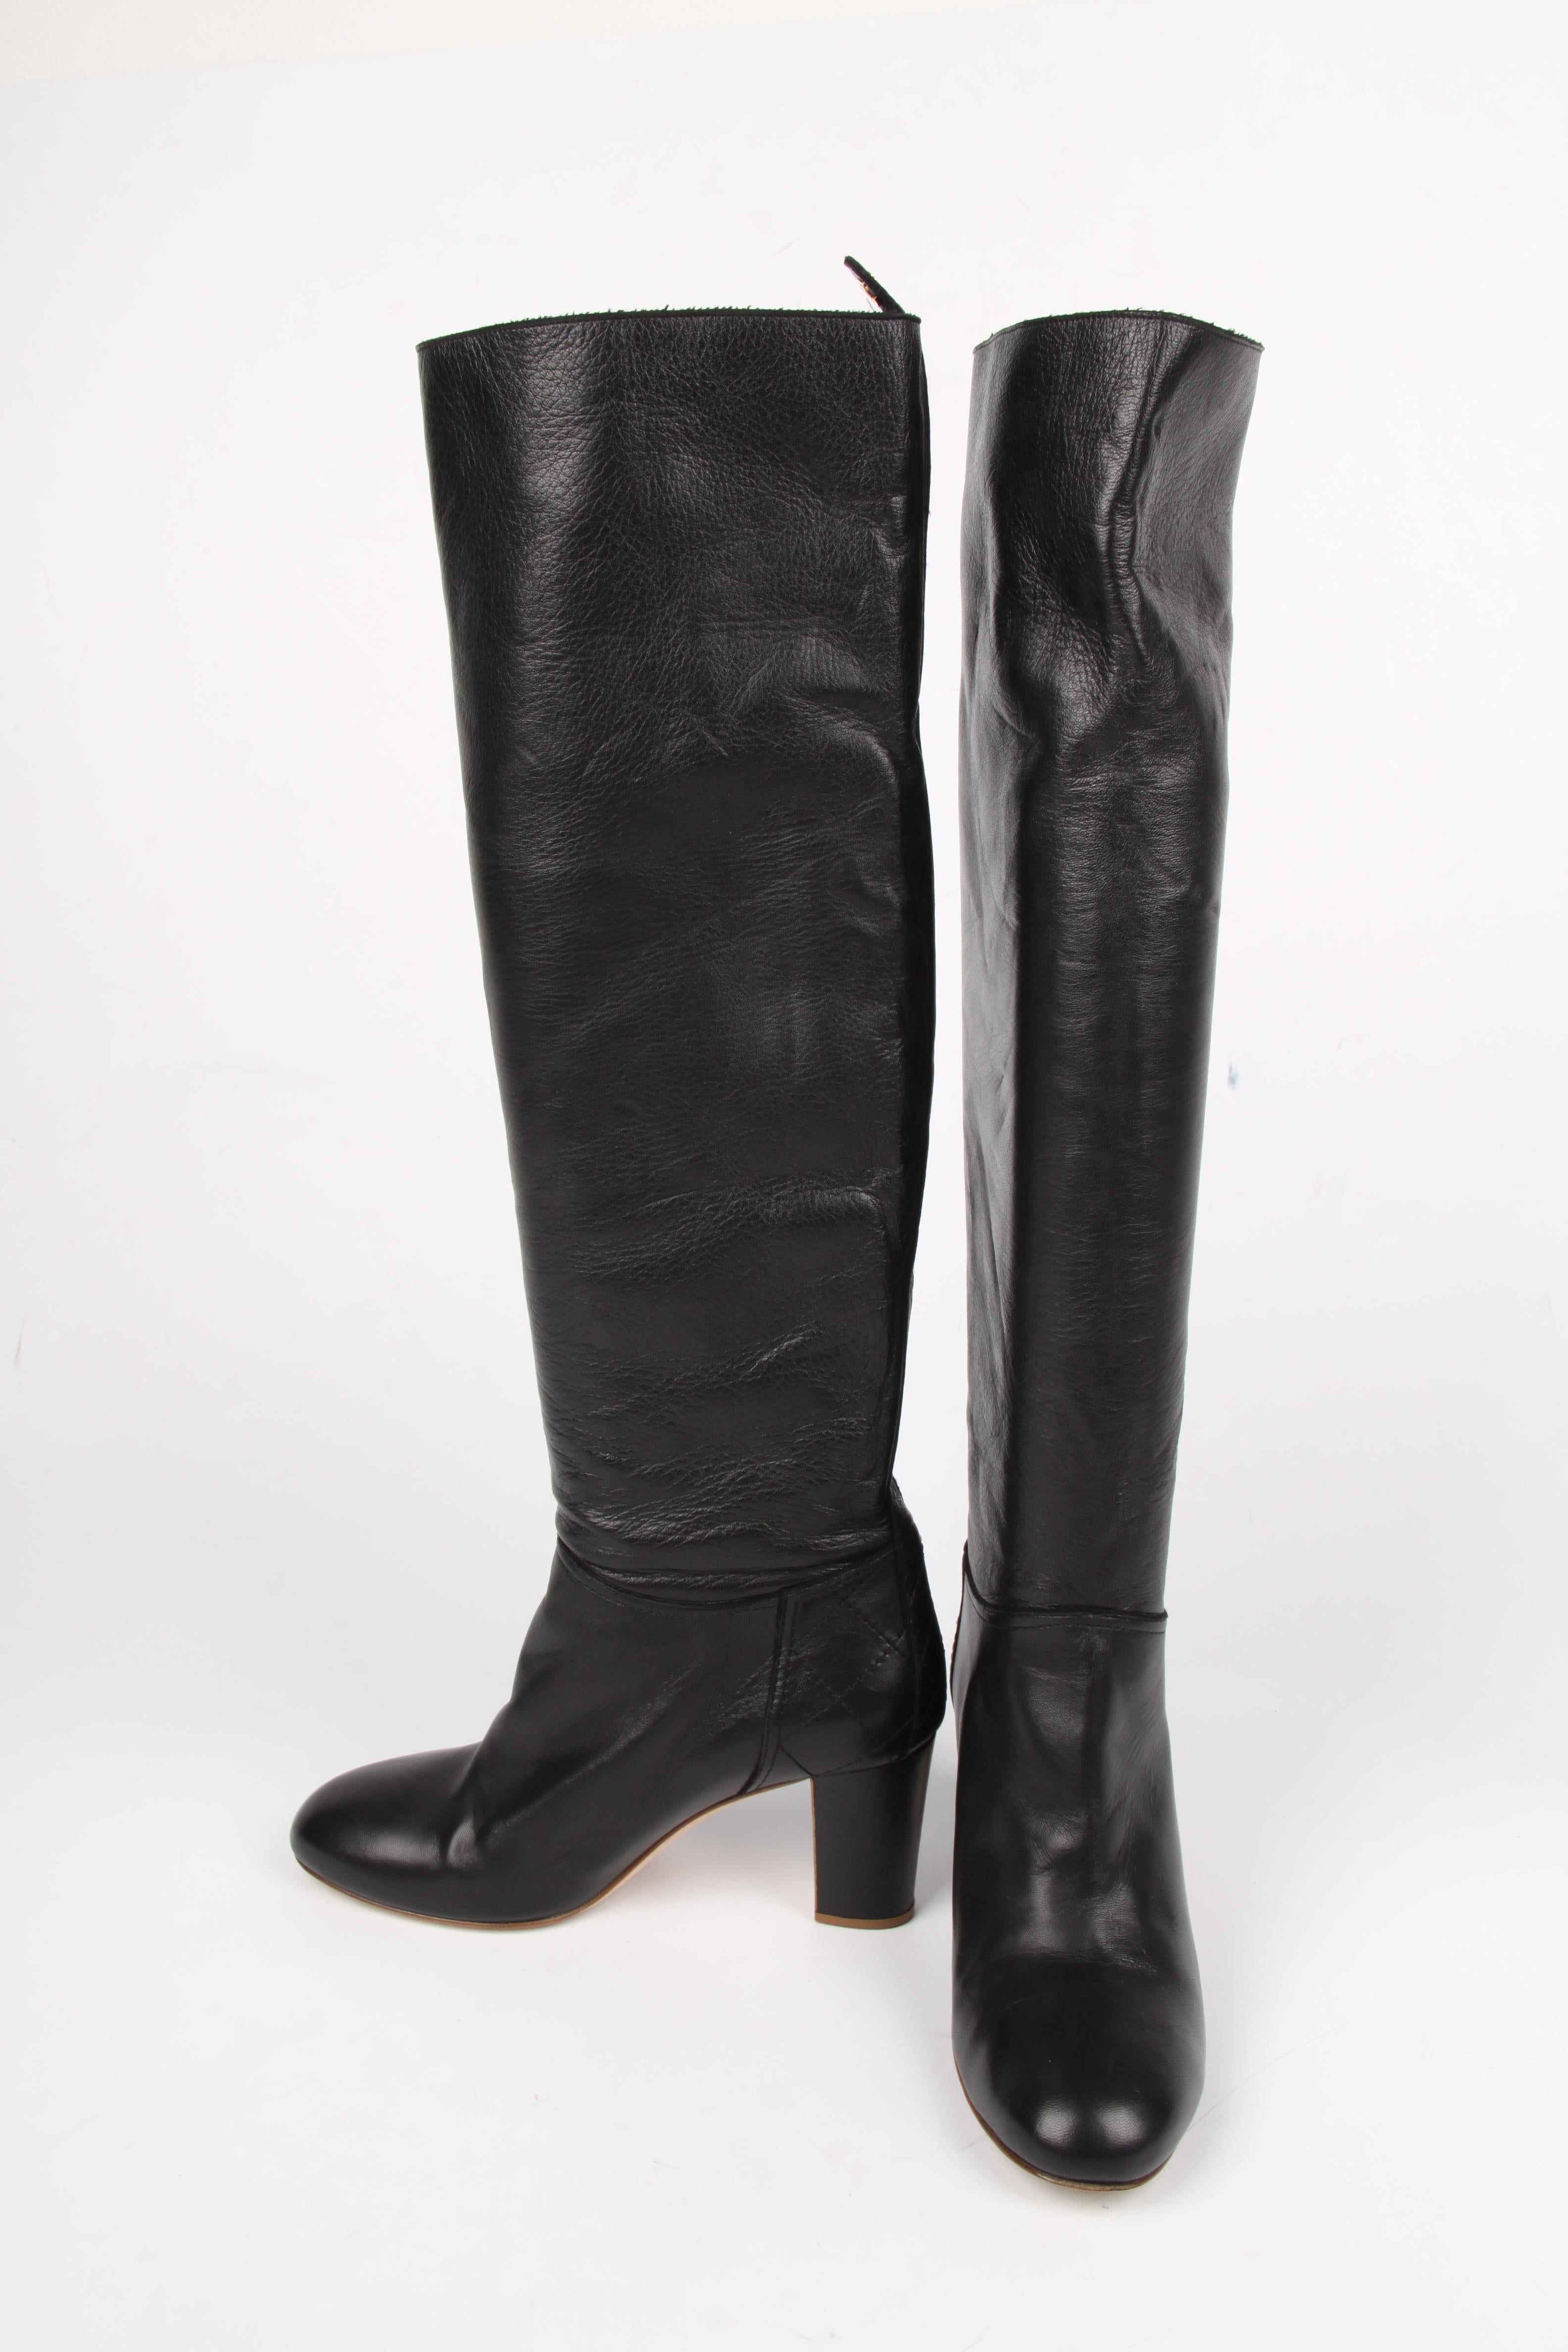 Knee-high pair of boots by Chanel in black leather, fantastic!

An almond shaped toe and sturdy heel that measures 7,5 centimeters, no platform. On the back a quilted detail and on top of the boot a tab with CC logo. No zippers in the 50 centimeters